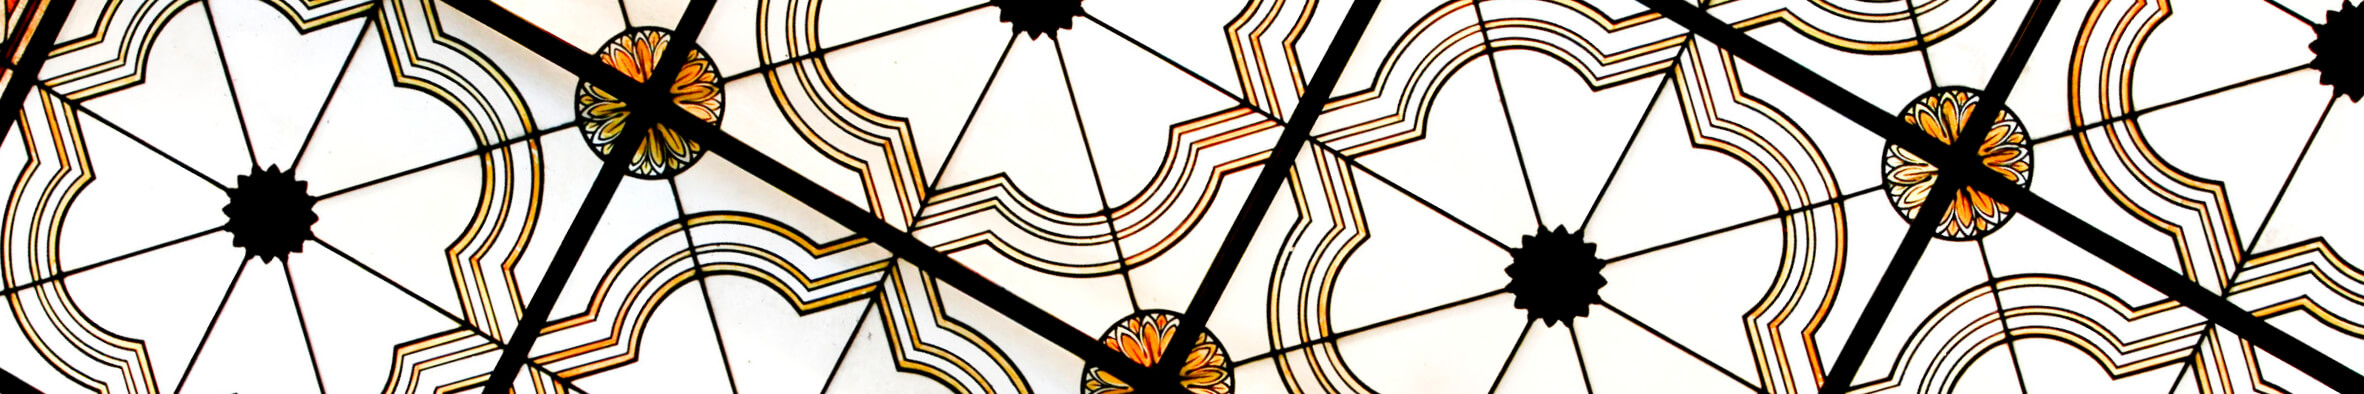 close up of intricate line designs on glass